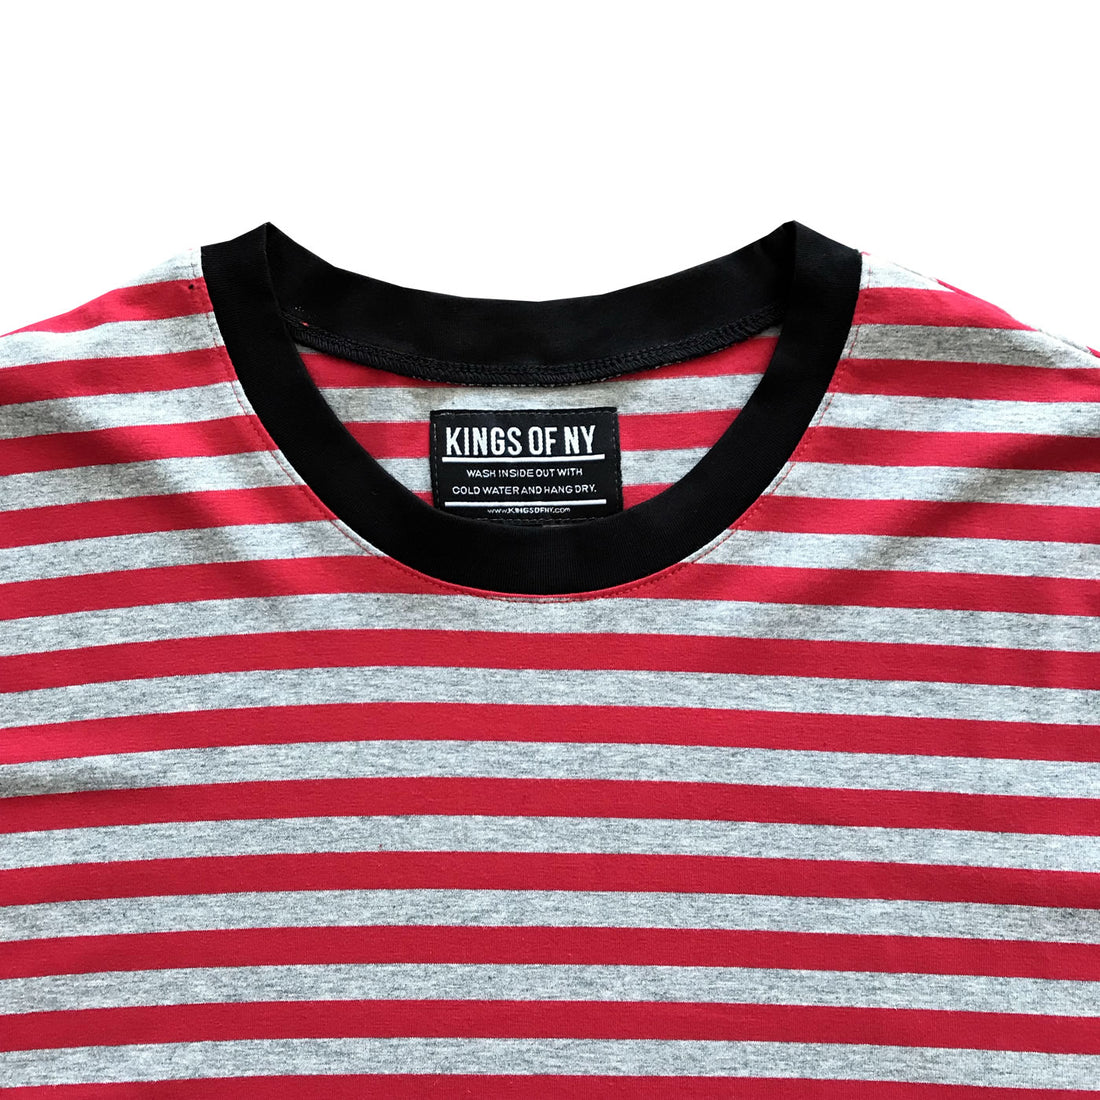 Red and Grey Striped Mens T-Shirt